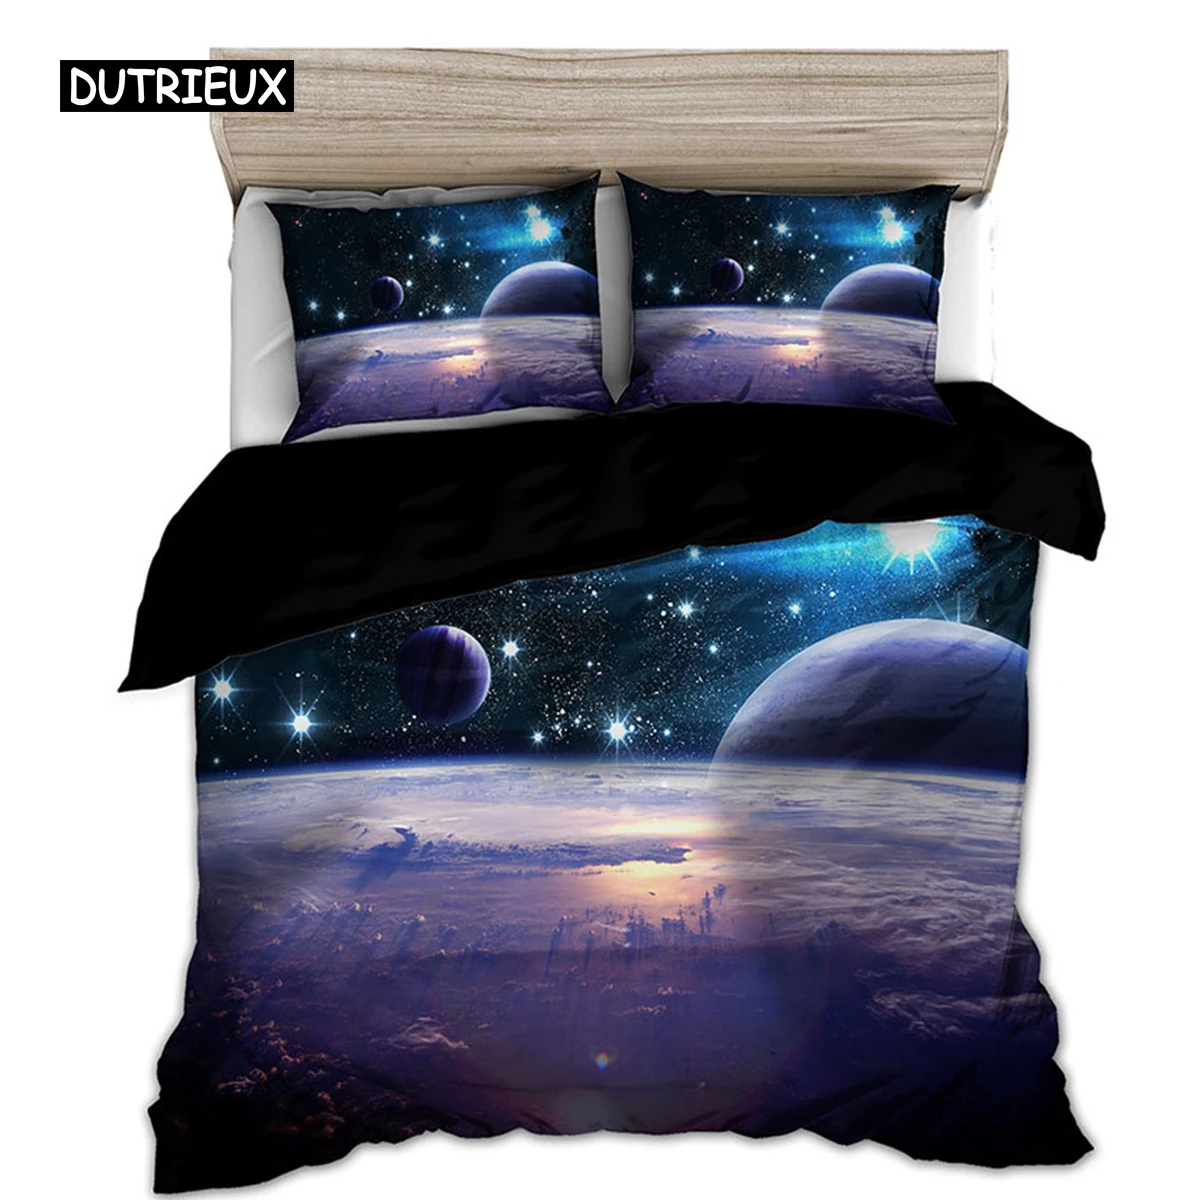 

Space star 3d Galaxy Duvet Cover Set Single double Twin/Queen 2pcs/3pcs bedding sets Universe Outer Space Themed Bed Linen